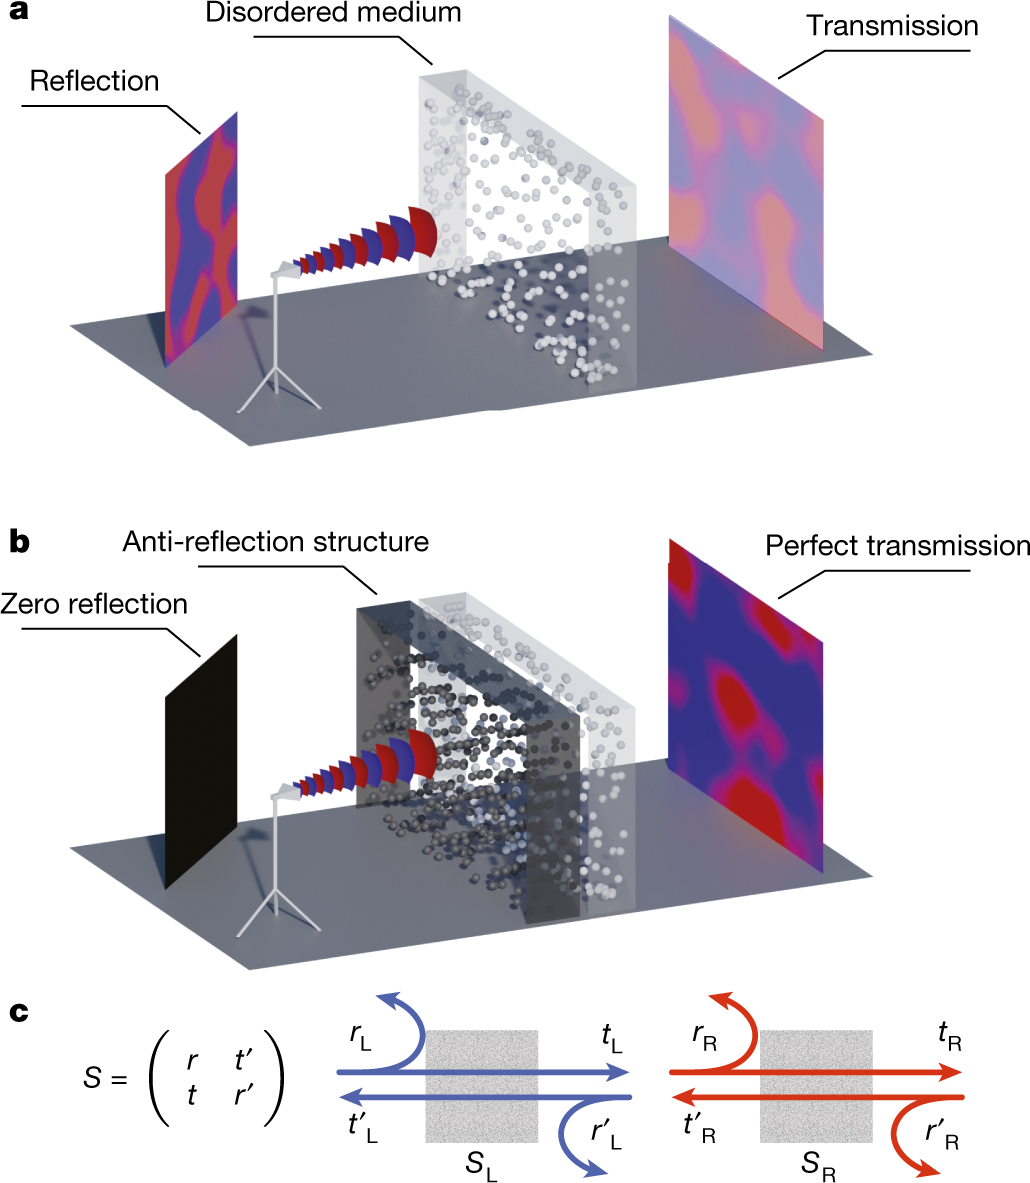 Anti-reflection structure for perfect transmission through complex media |  Nature